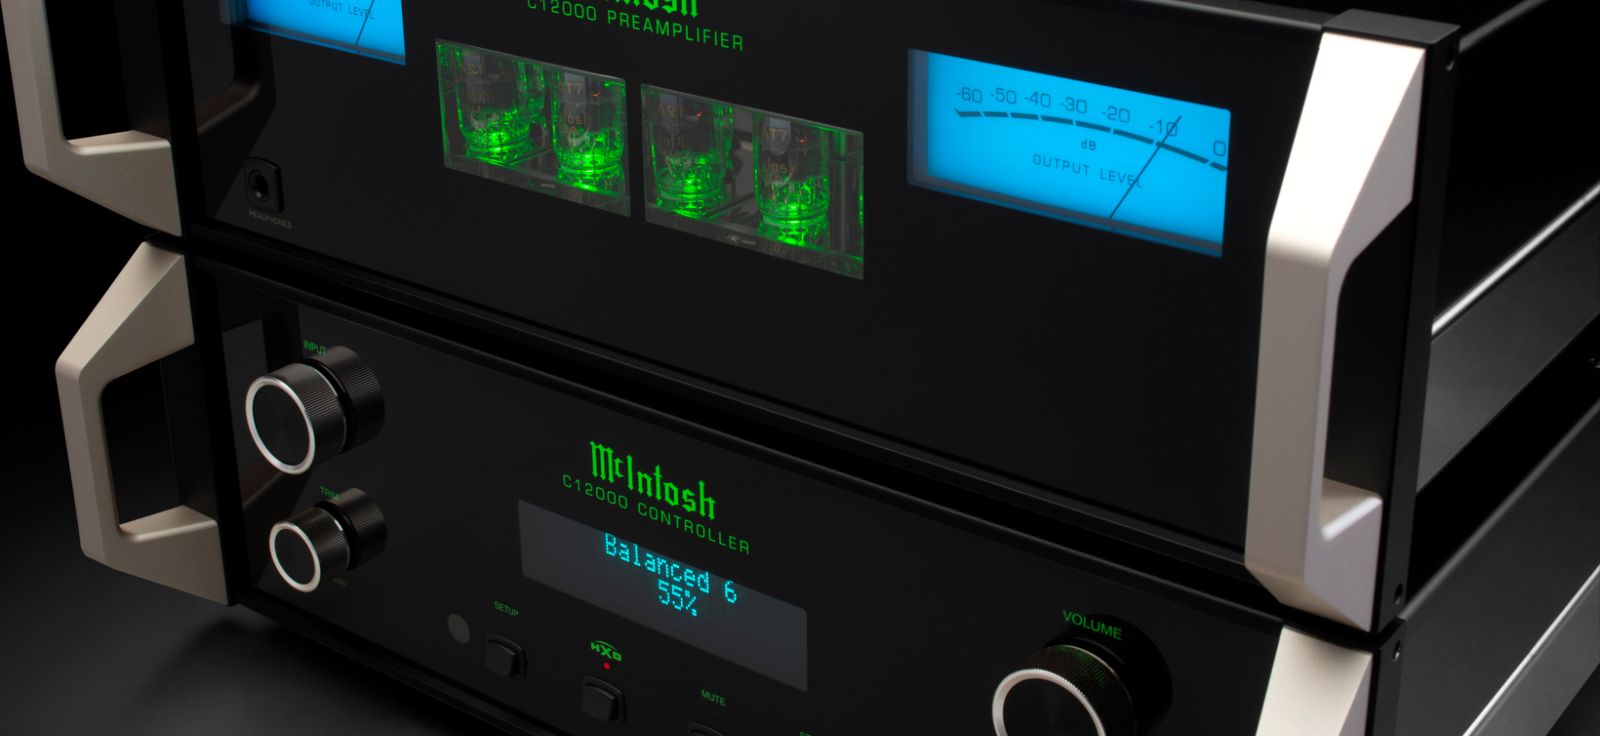 New C12000 Preamplifier offers valve and solid state outputs, plus new levels of user customisation